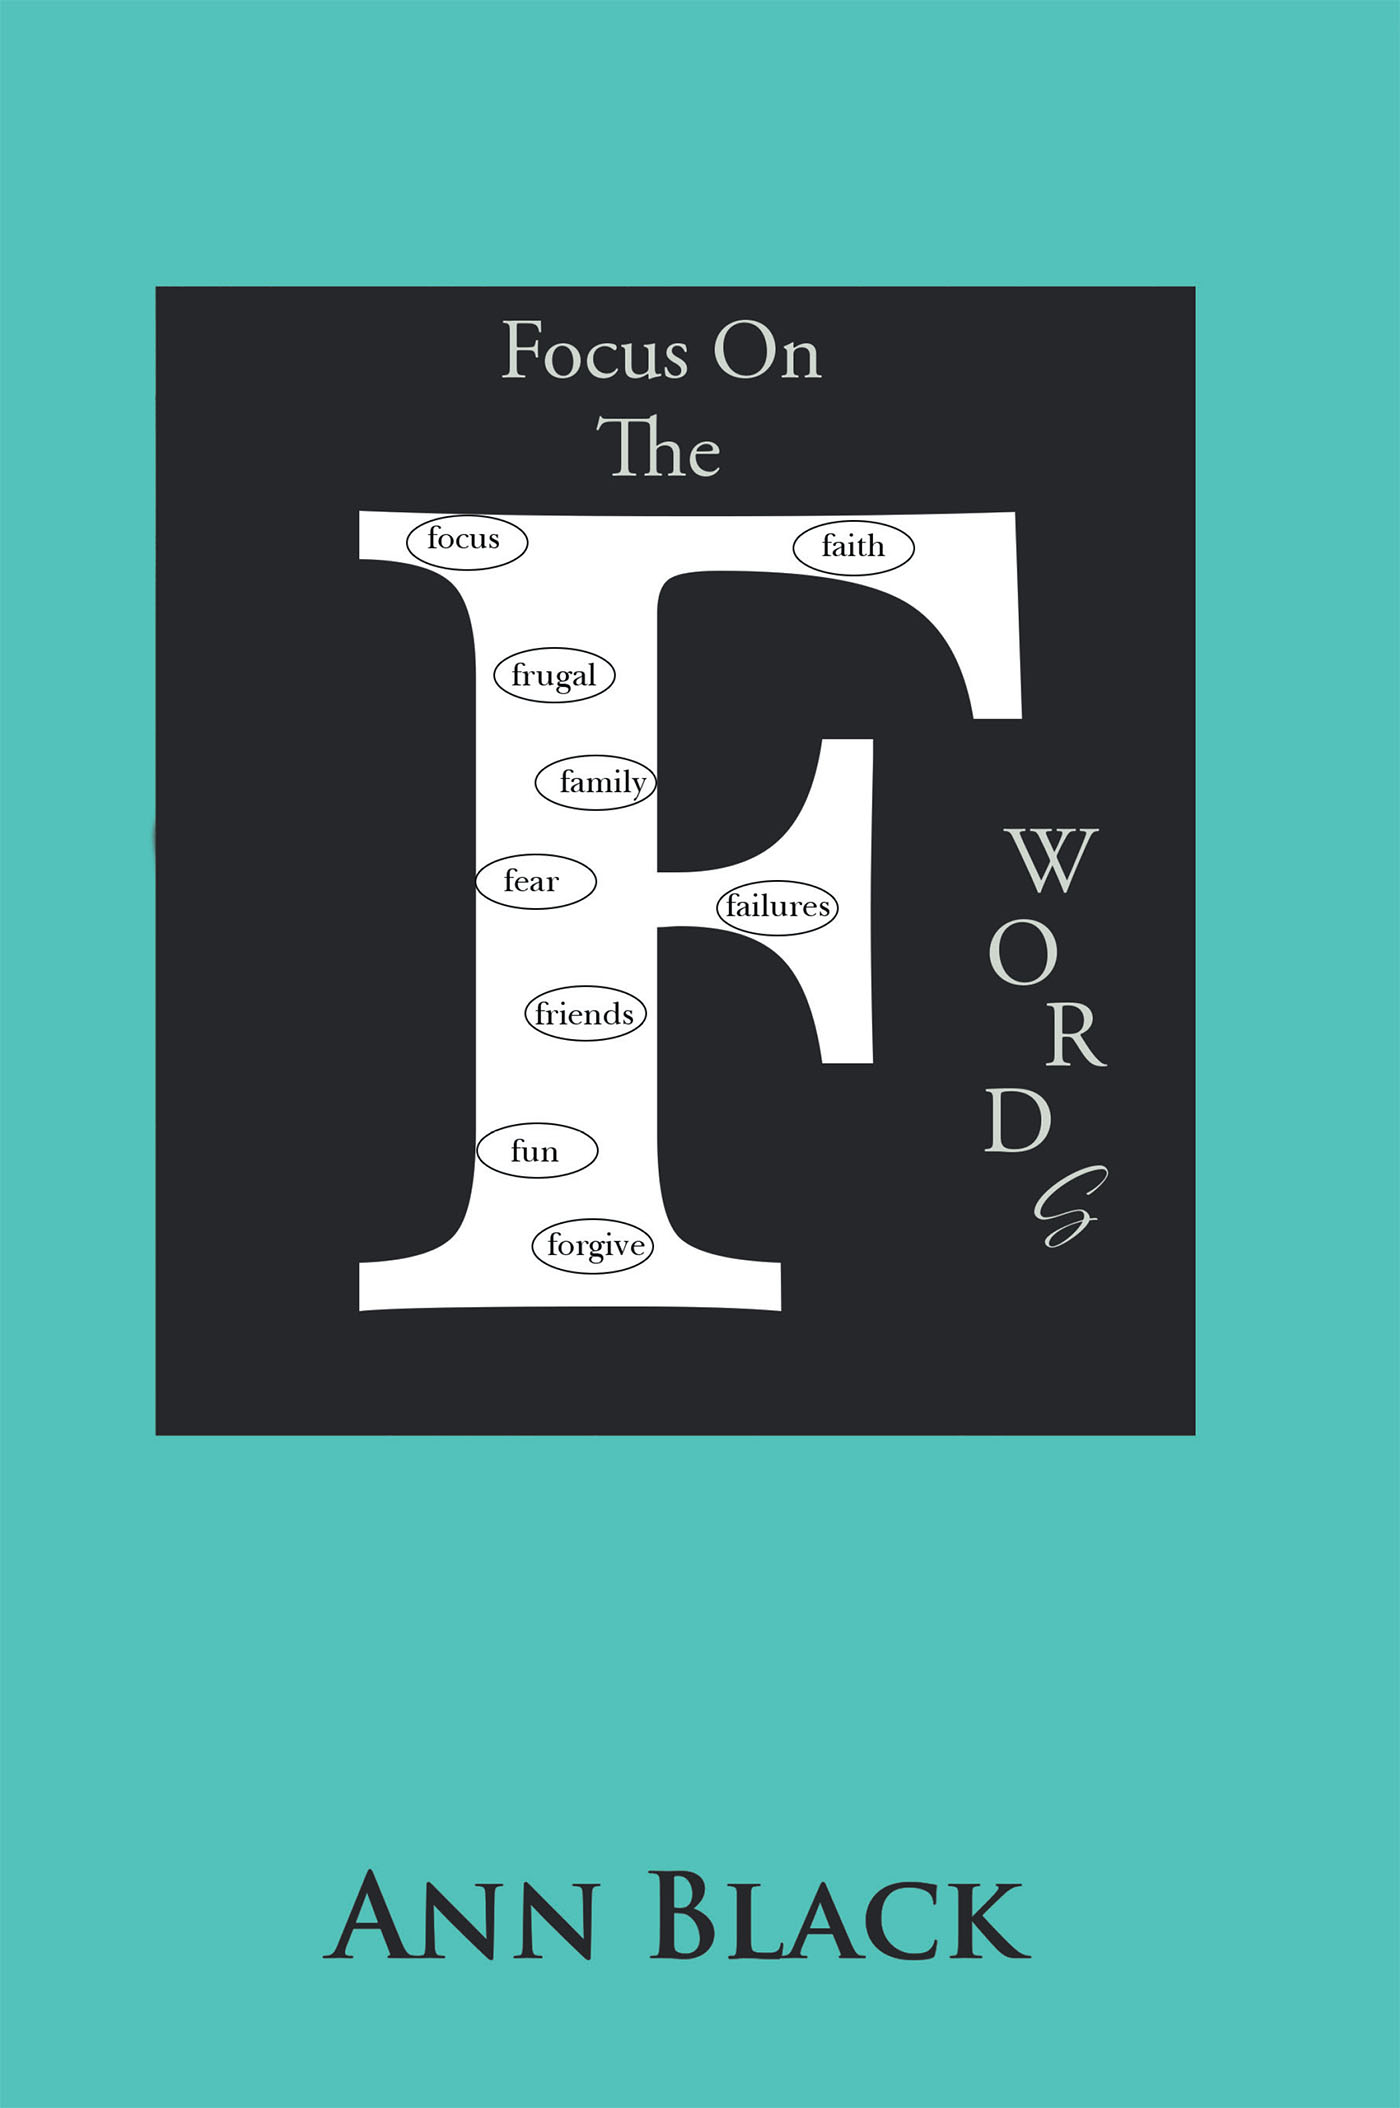 Author Ann Black’s New Book, "Focus On The F WordS," Discusses the Author's Difficult Experiences Endured and the Valuable Lessons She Learned in Order to Survive